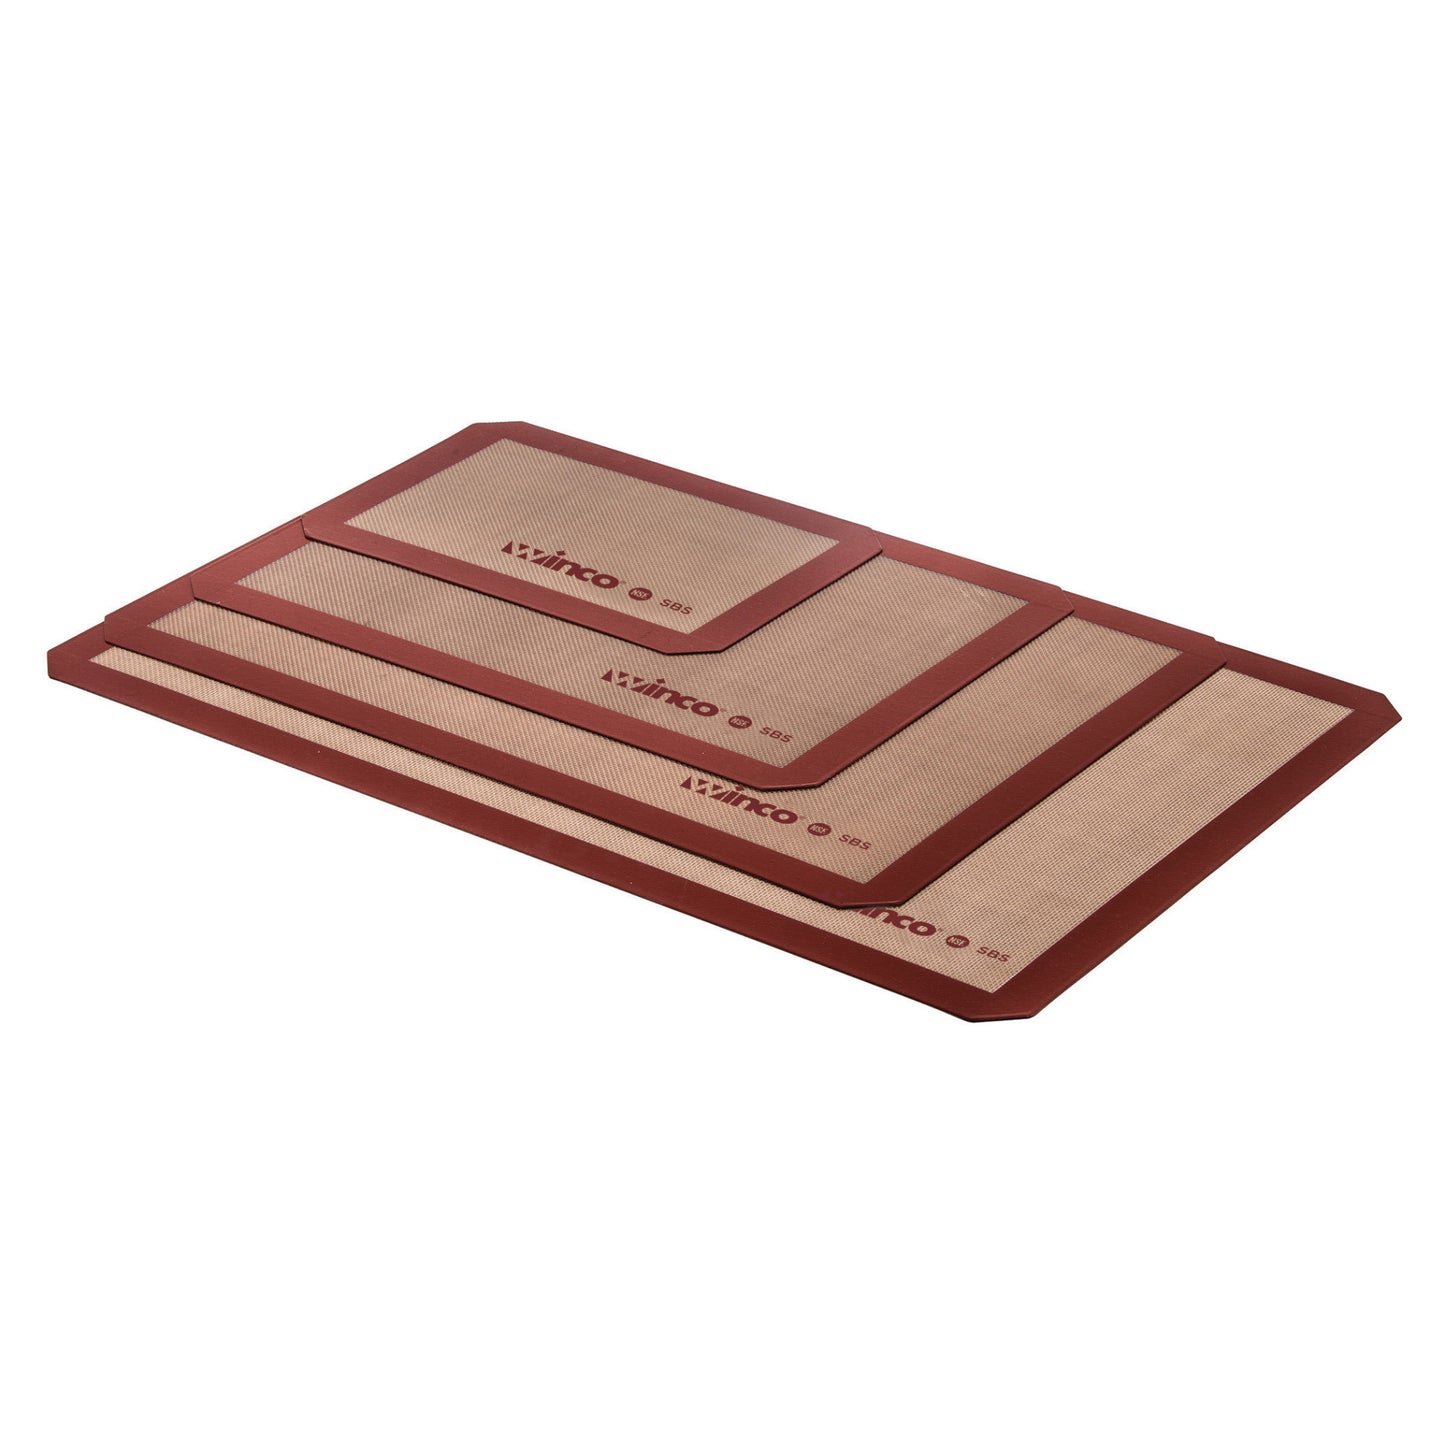 SBS-21 - Silicone Baking Mat - Two-Thirds (2/3)